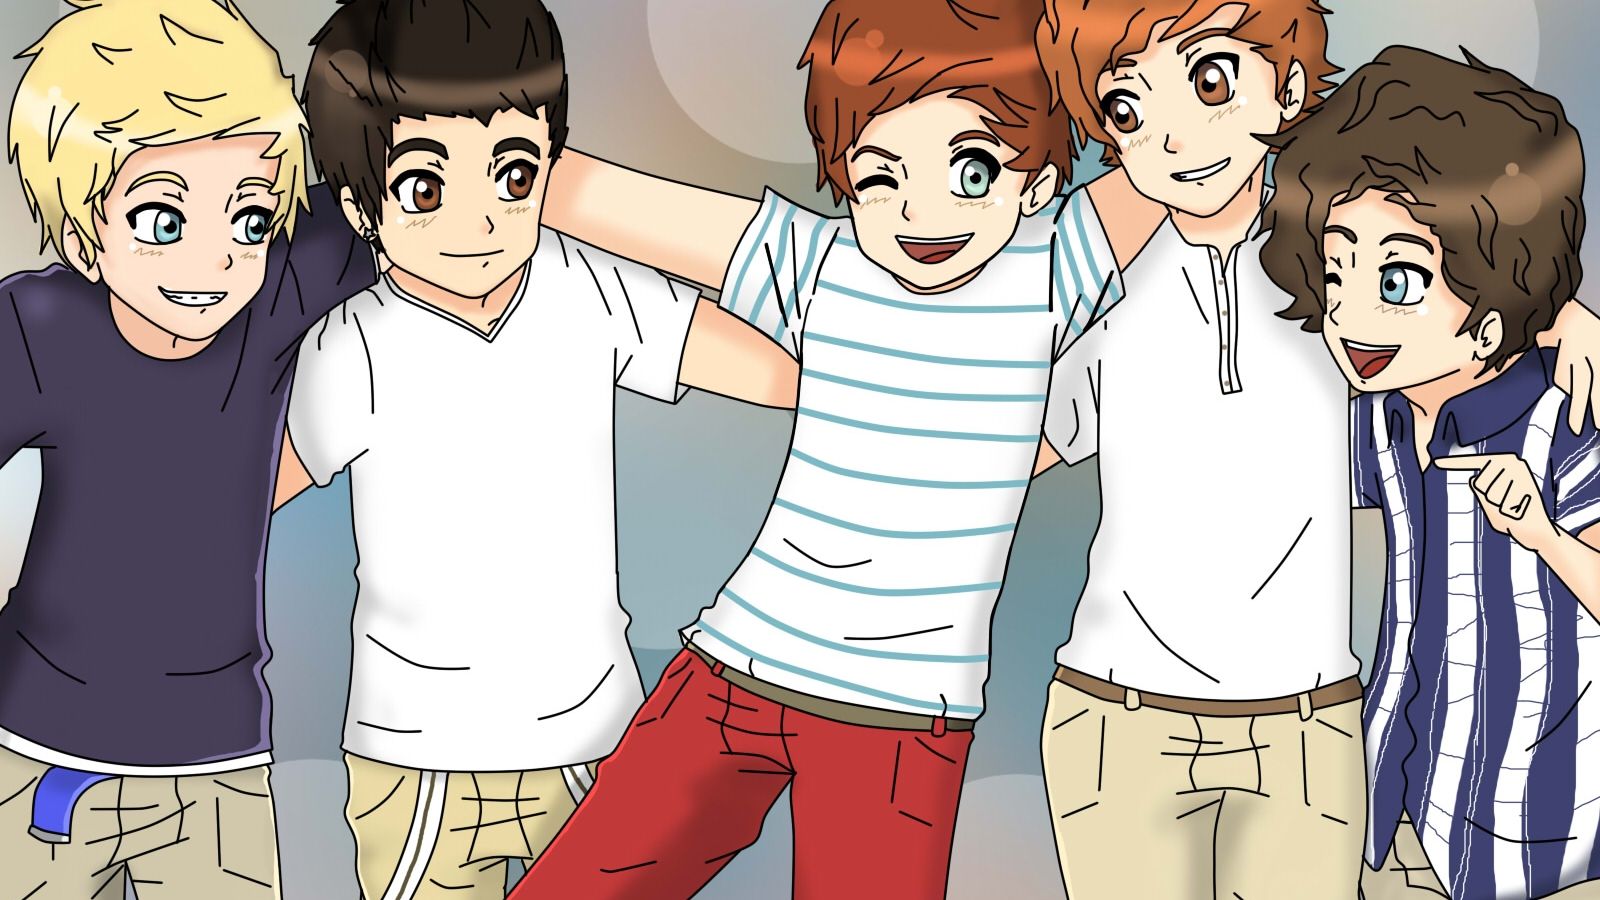 Free download One Direction What Makes You Beautiful [1600x1200] for your Desktop, Mobile & Tablet. Explore One Direction Cartoon Wallpaper. One Direction Cartoon Wallpaper, One Direction Background, One Direction Wallpaper